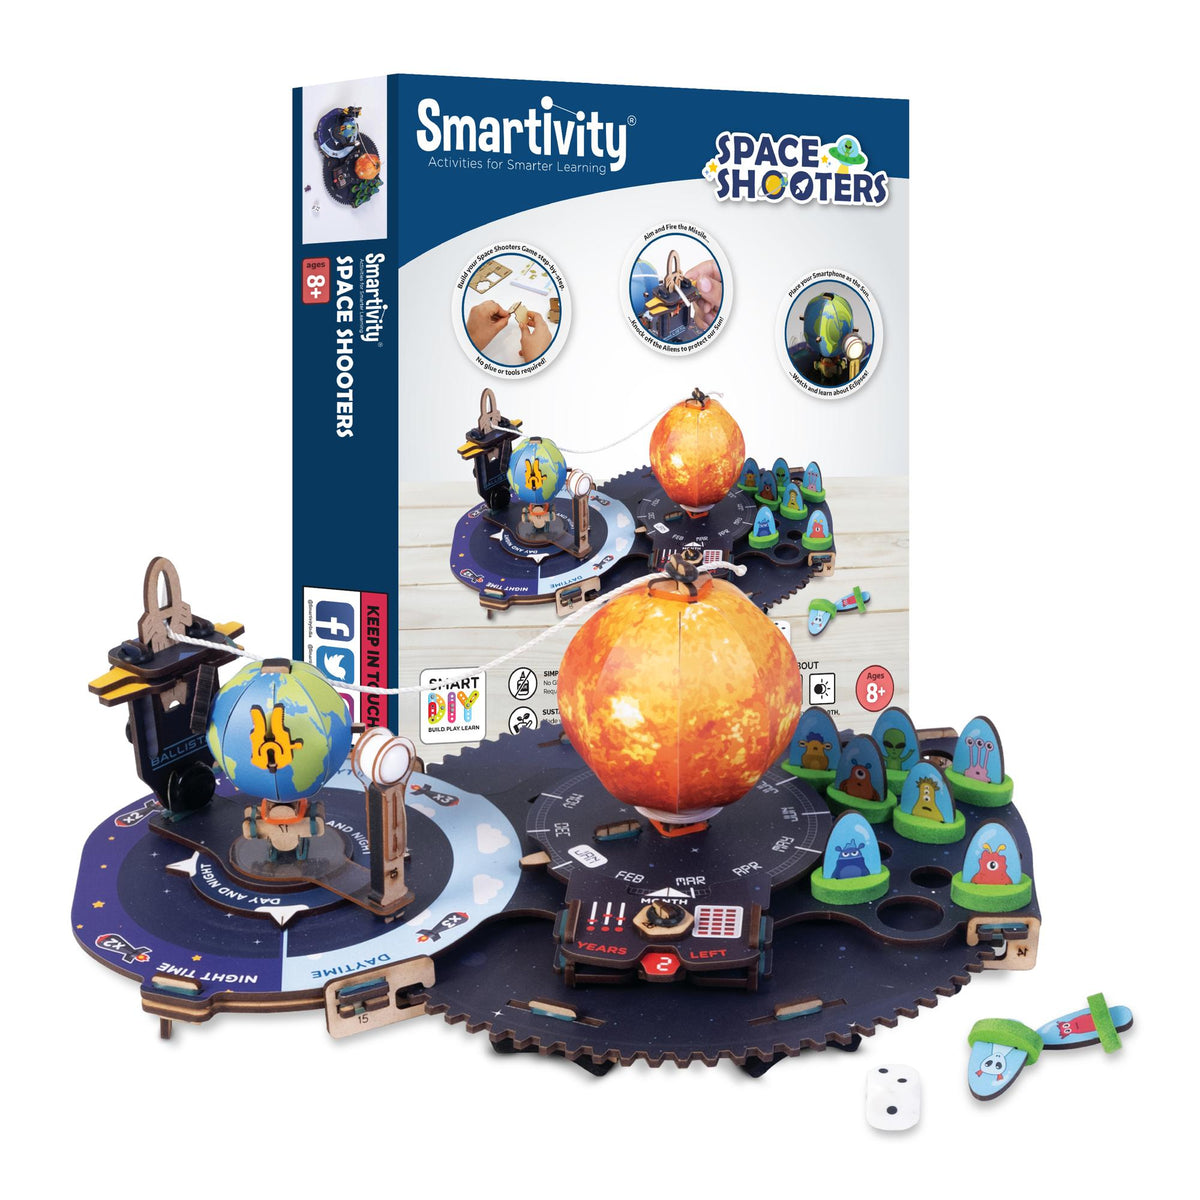 Smartivity - Space Shooters